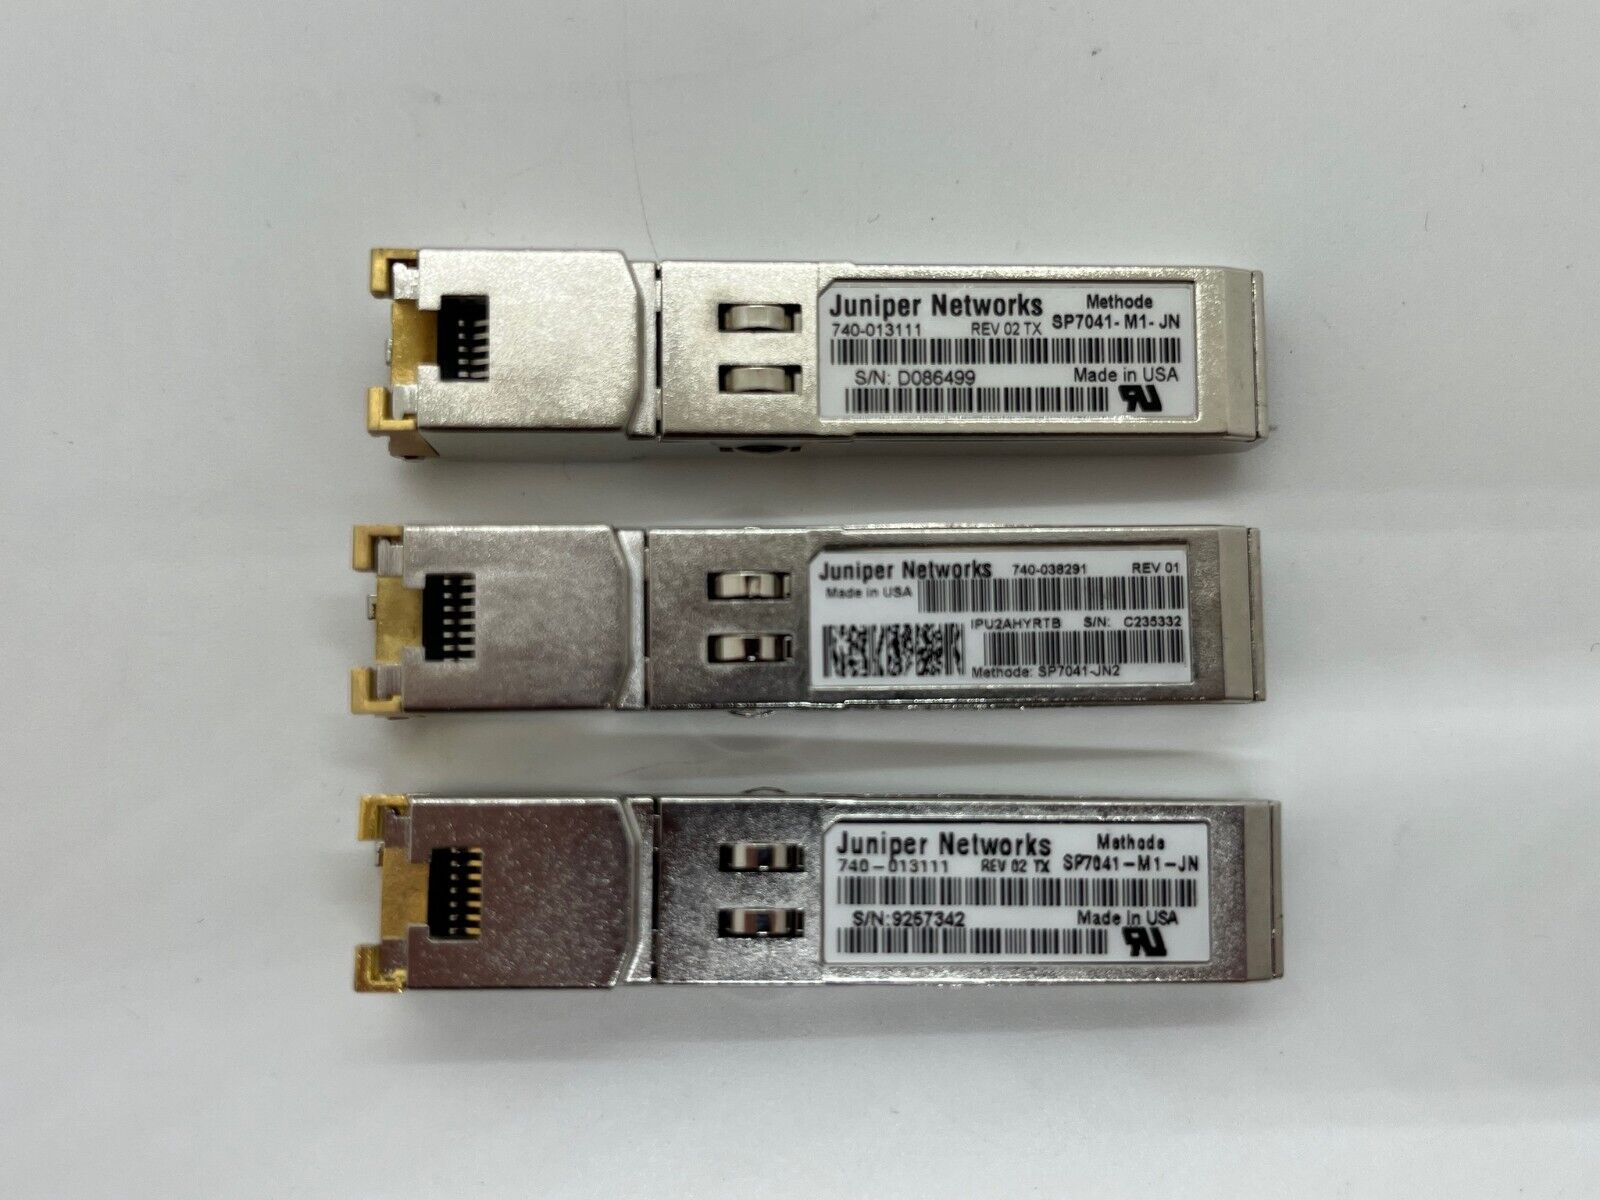 Mixed Juniper Networks SFP Adapters - (2pc) 740-013111 (1pc) 740-038291